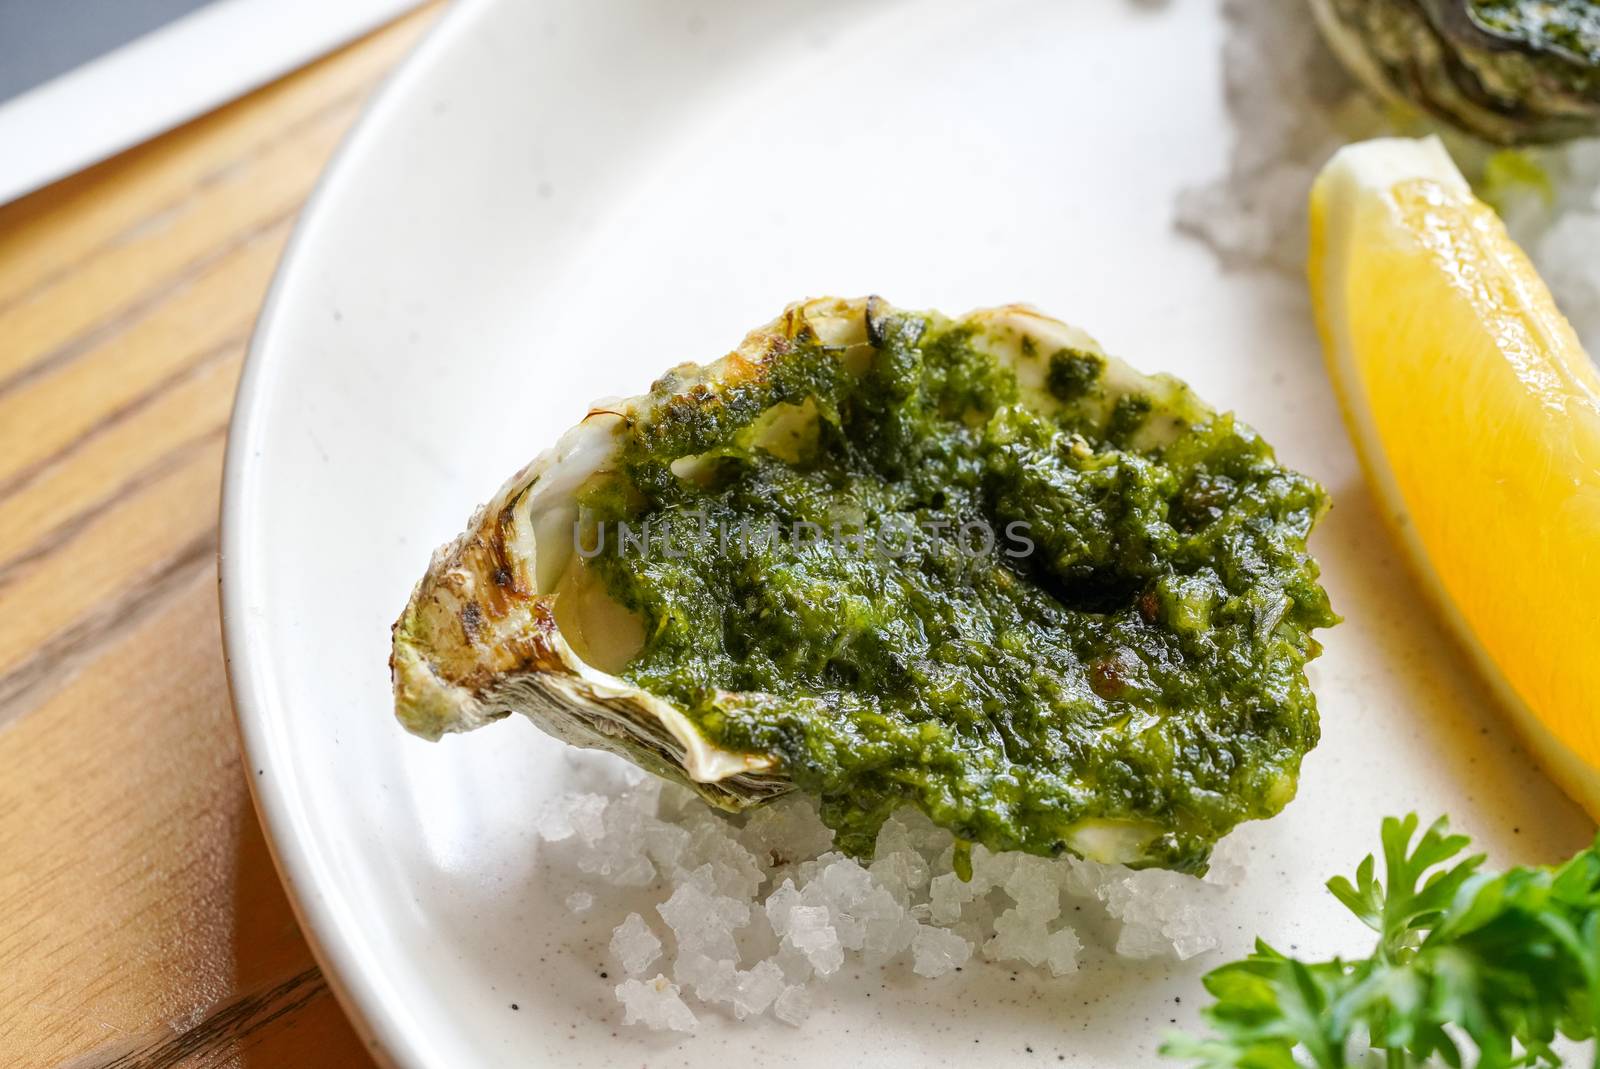 Oysters Rockefeller. Half-shell oysters  topped with a rich sauce of butter, parsley and green herbs served on  white plate with sea salt and lemon.